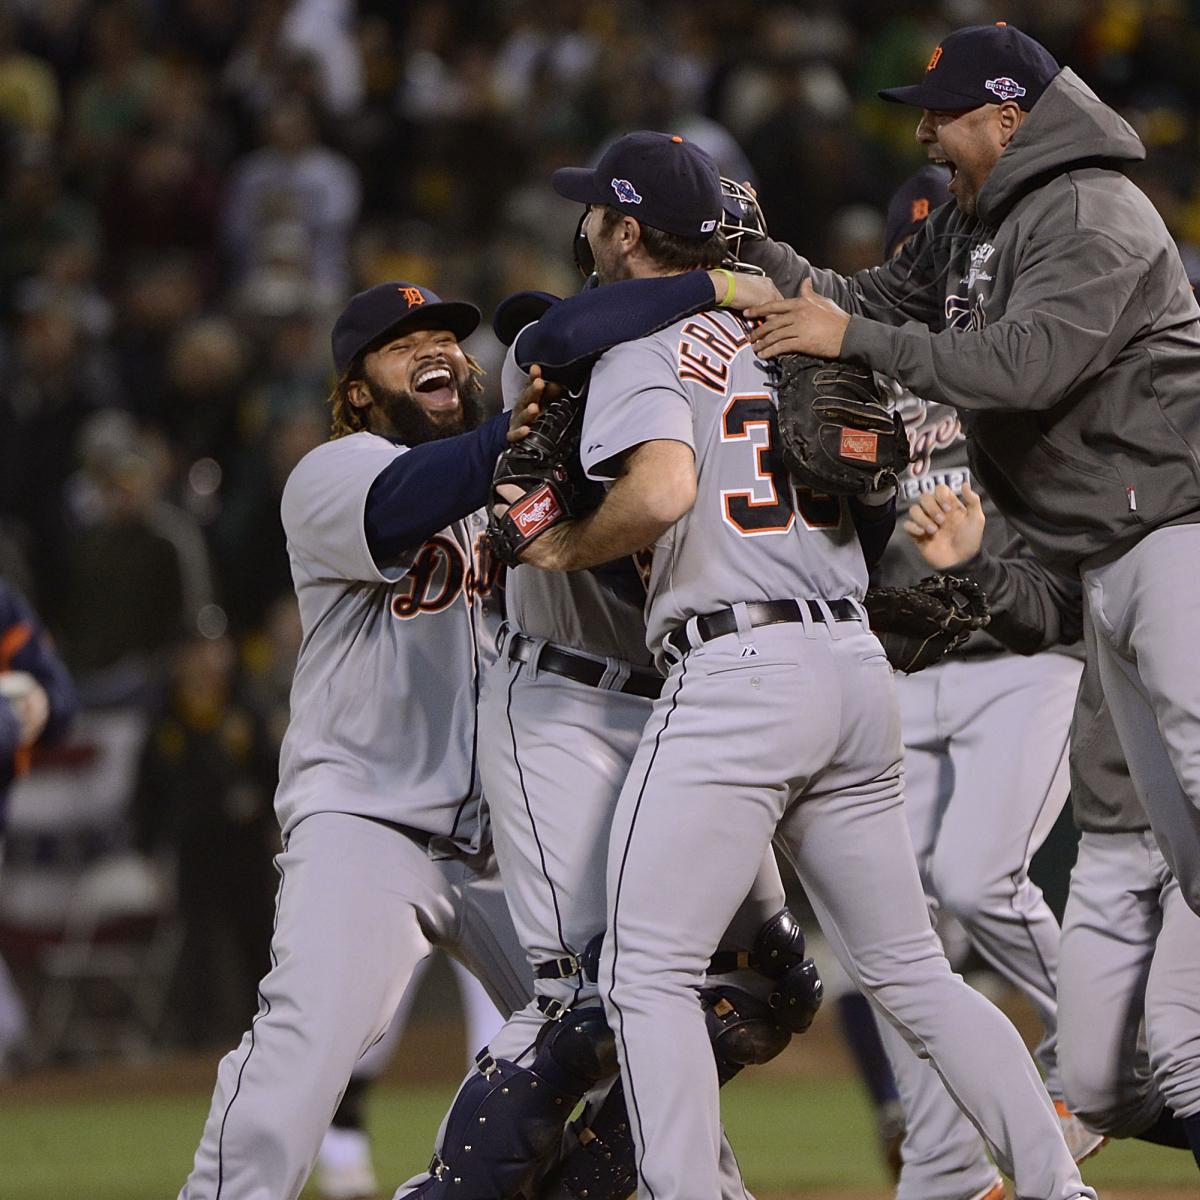 ALCS Schedule 2012: When and Where to Watch Race for the Pennant | News, Scores, Highlights